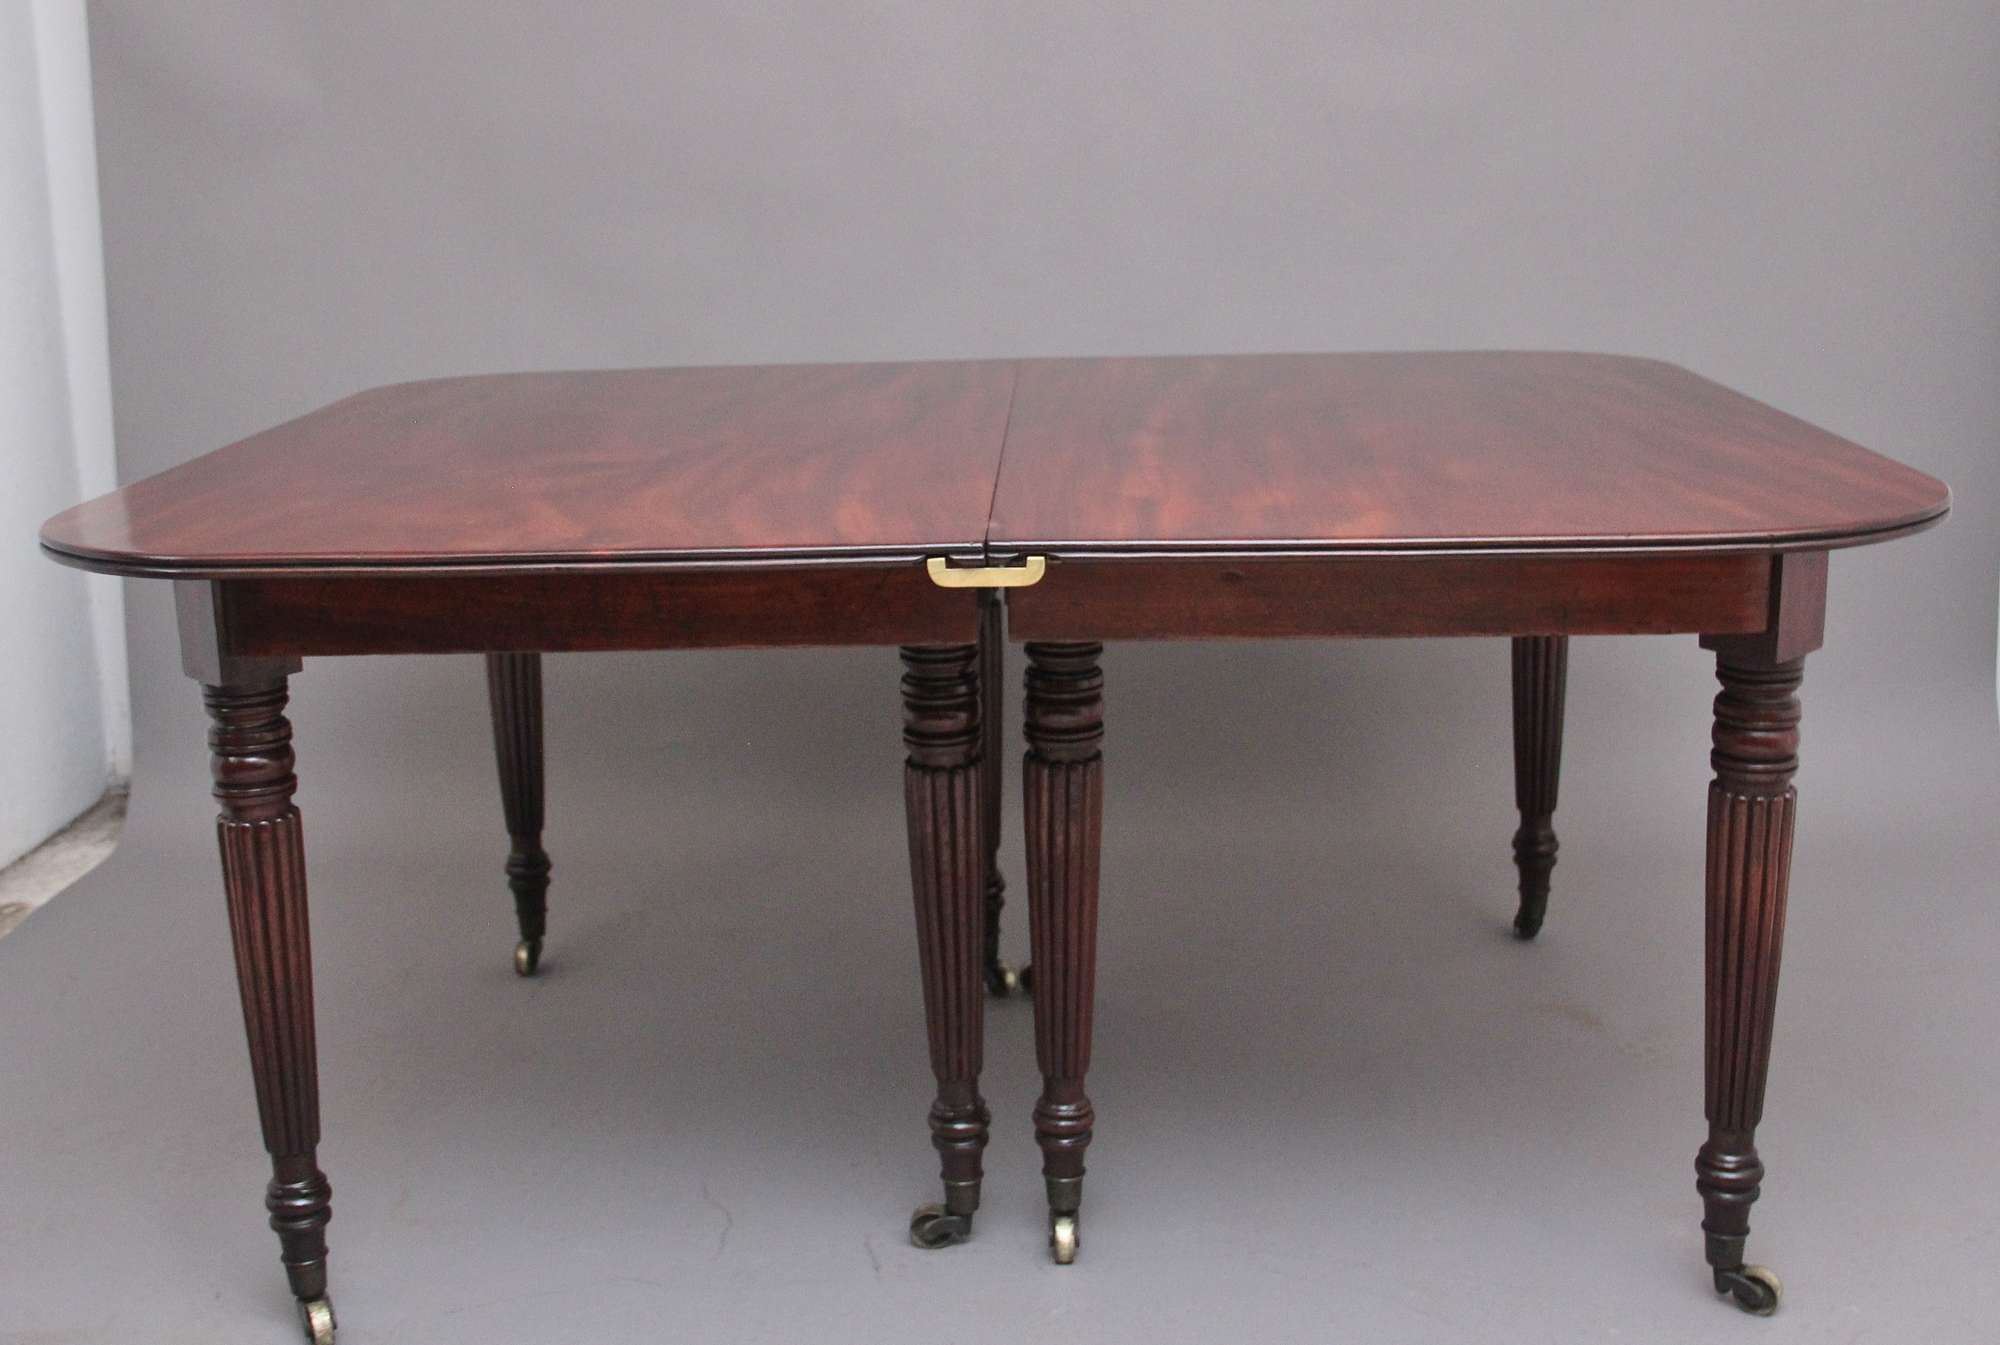 A Large And Impressive Early 19th Century Mahogany Extending Antique Dining Table